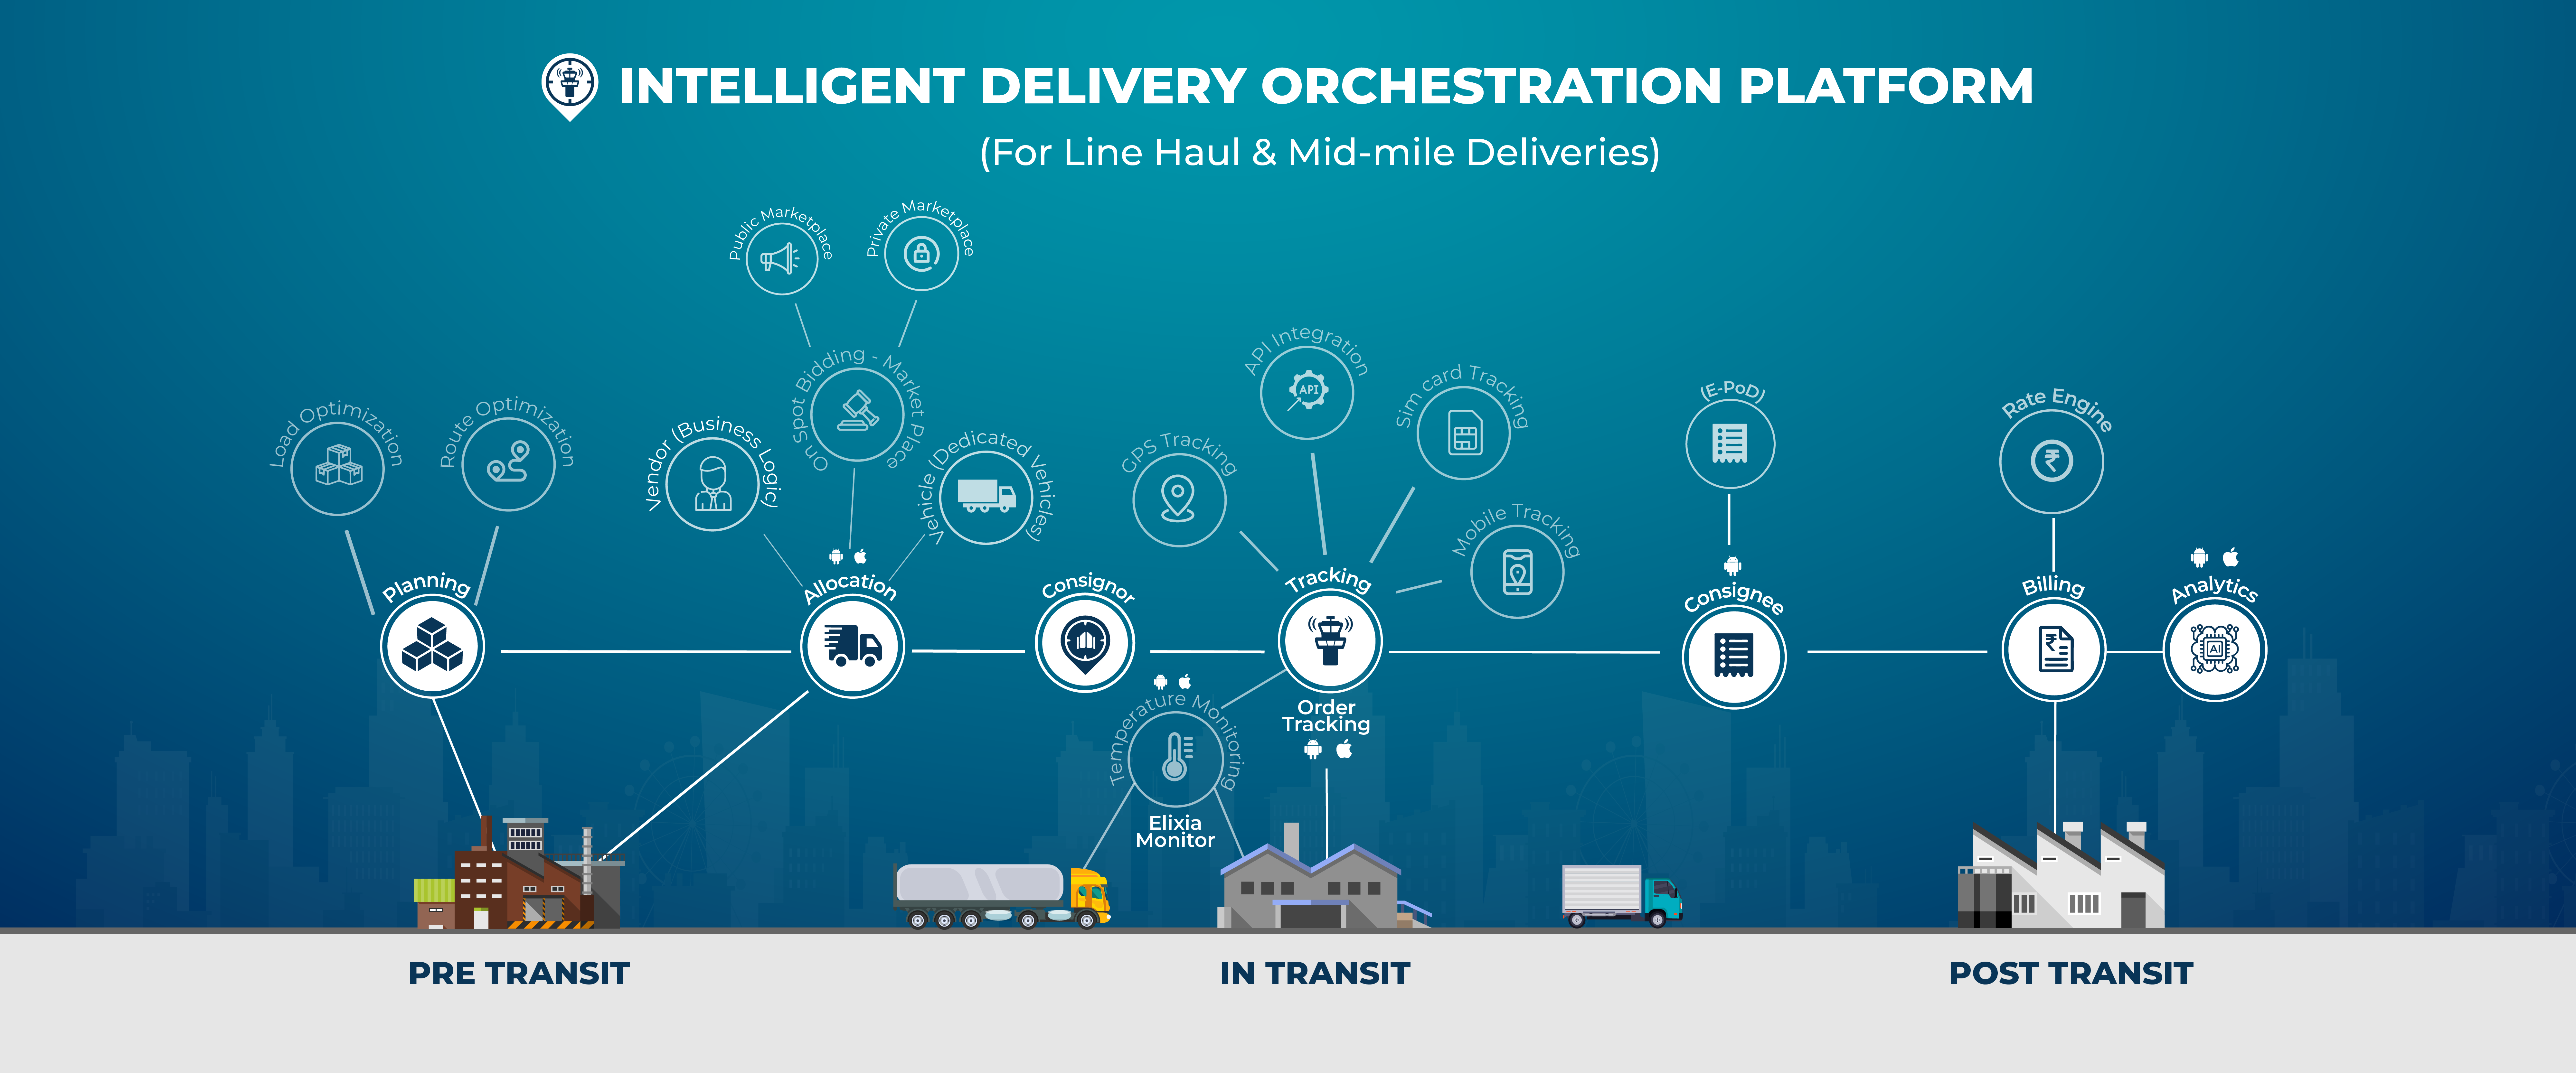 #linehaul deliveries #supplychainvisibility